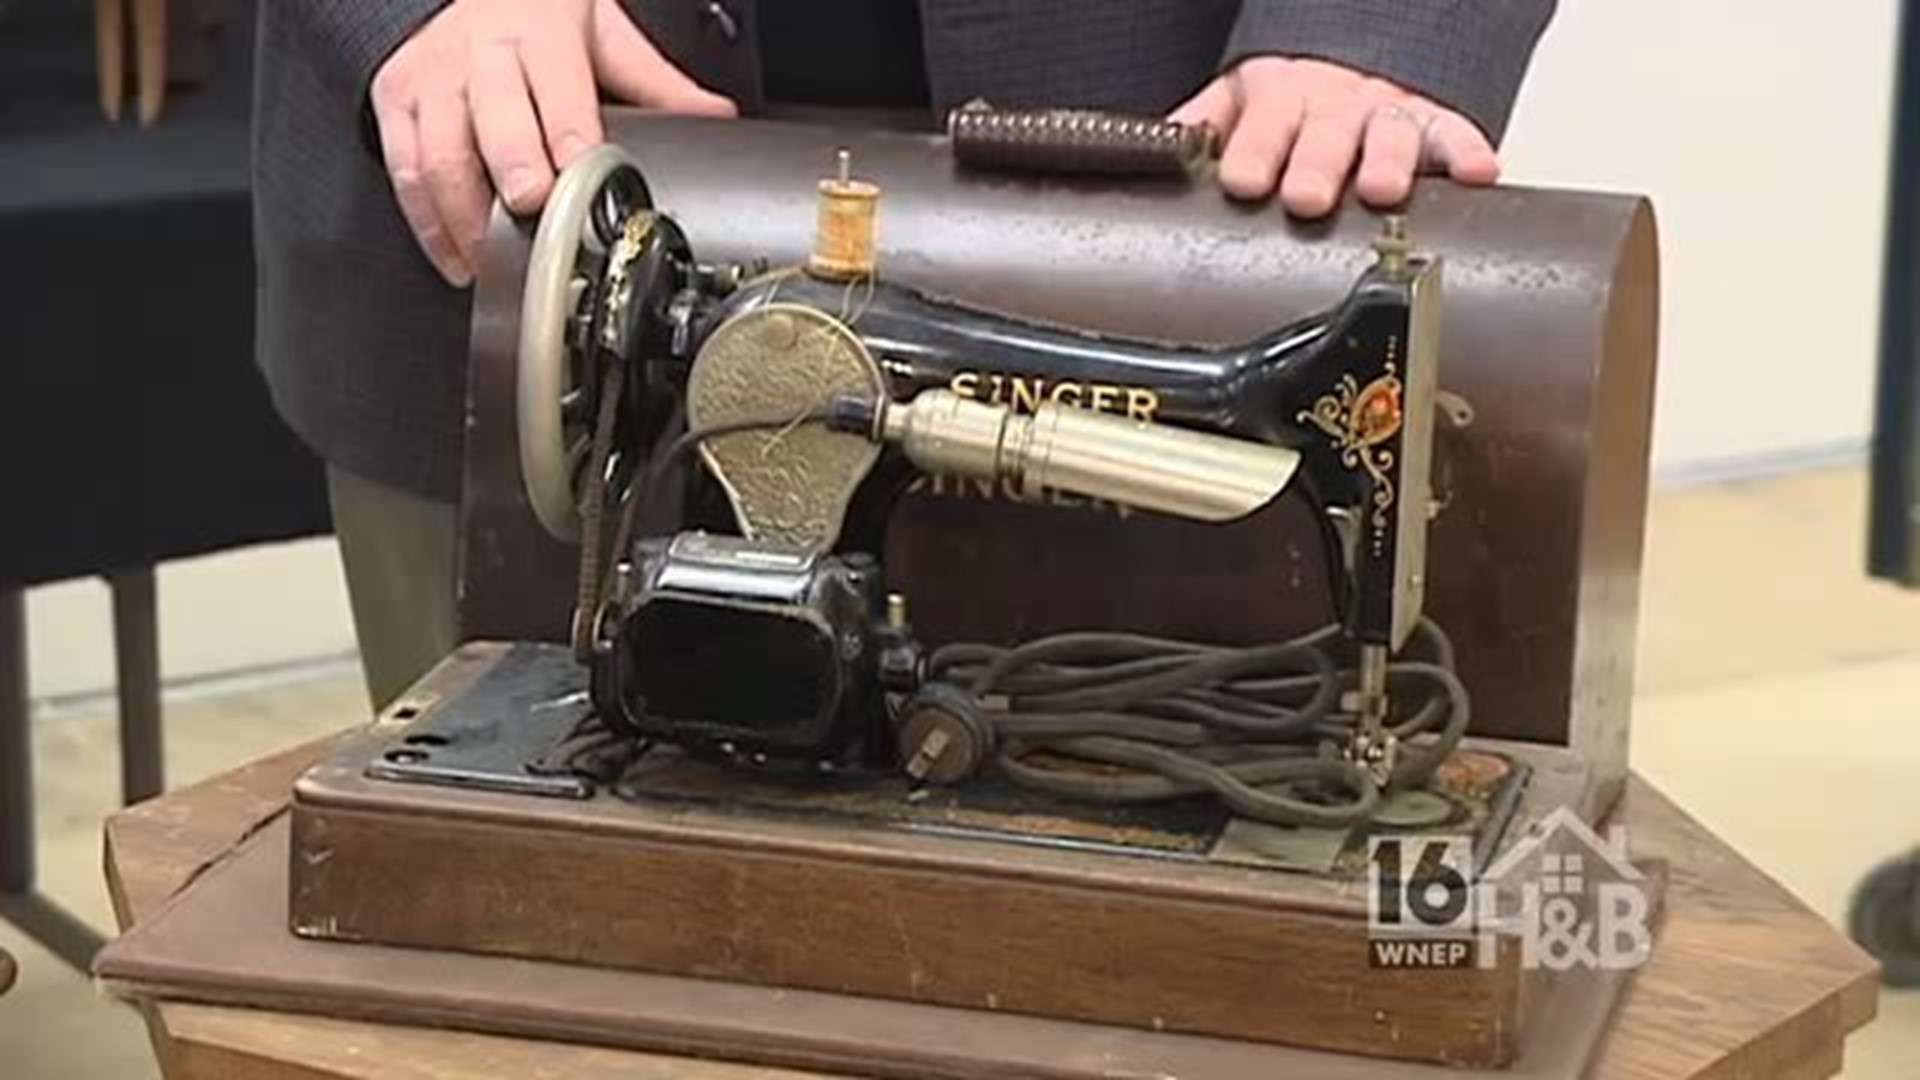 Know Before You Throw: Sewing Machines